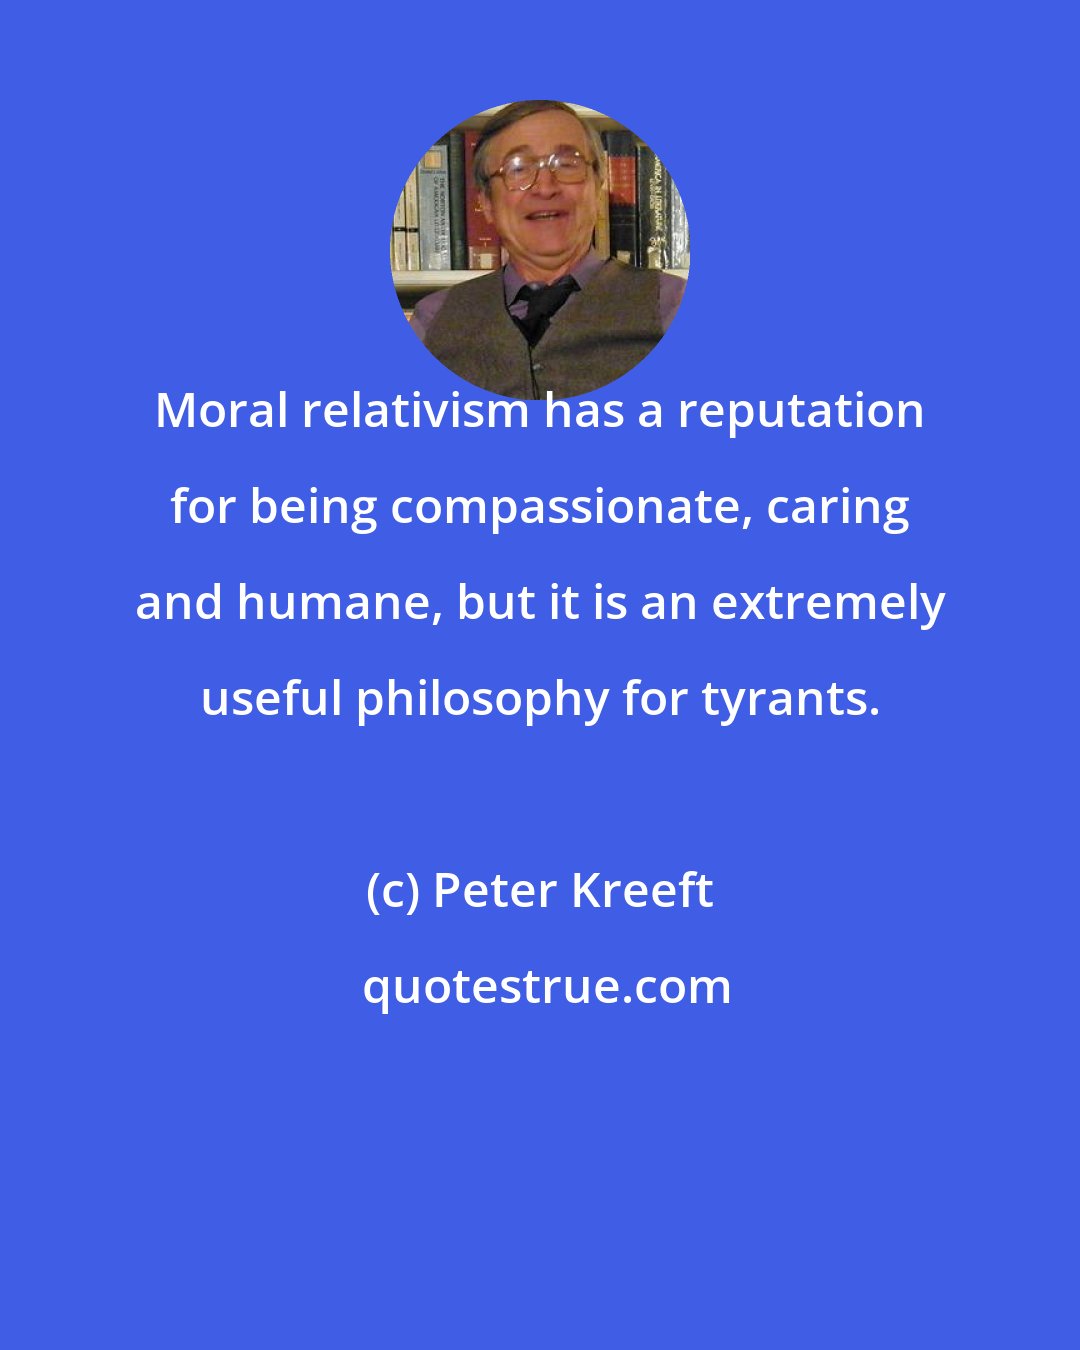 Peter Kreeft: Moral relativism has a reputation for being compassionate, caring and humane, but it is an extremely useful philosophy for tyrants.